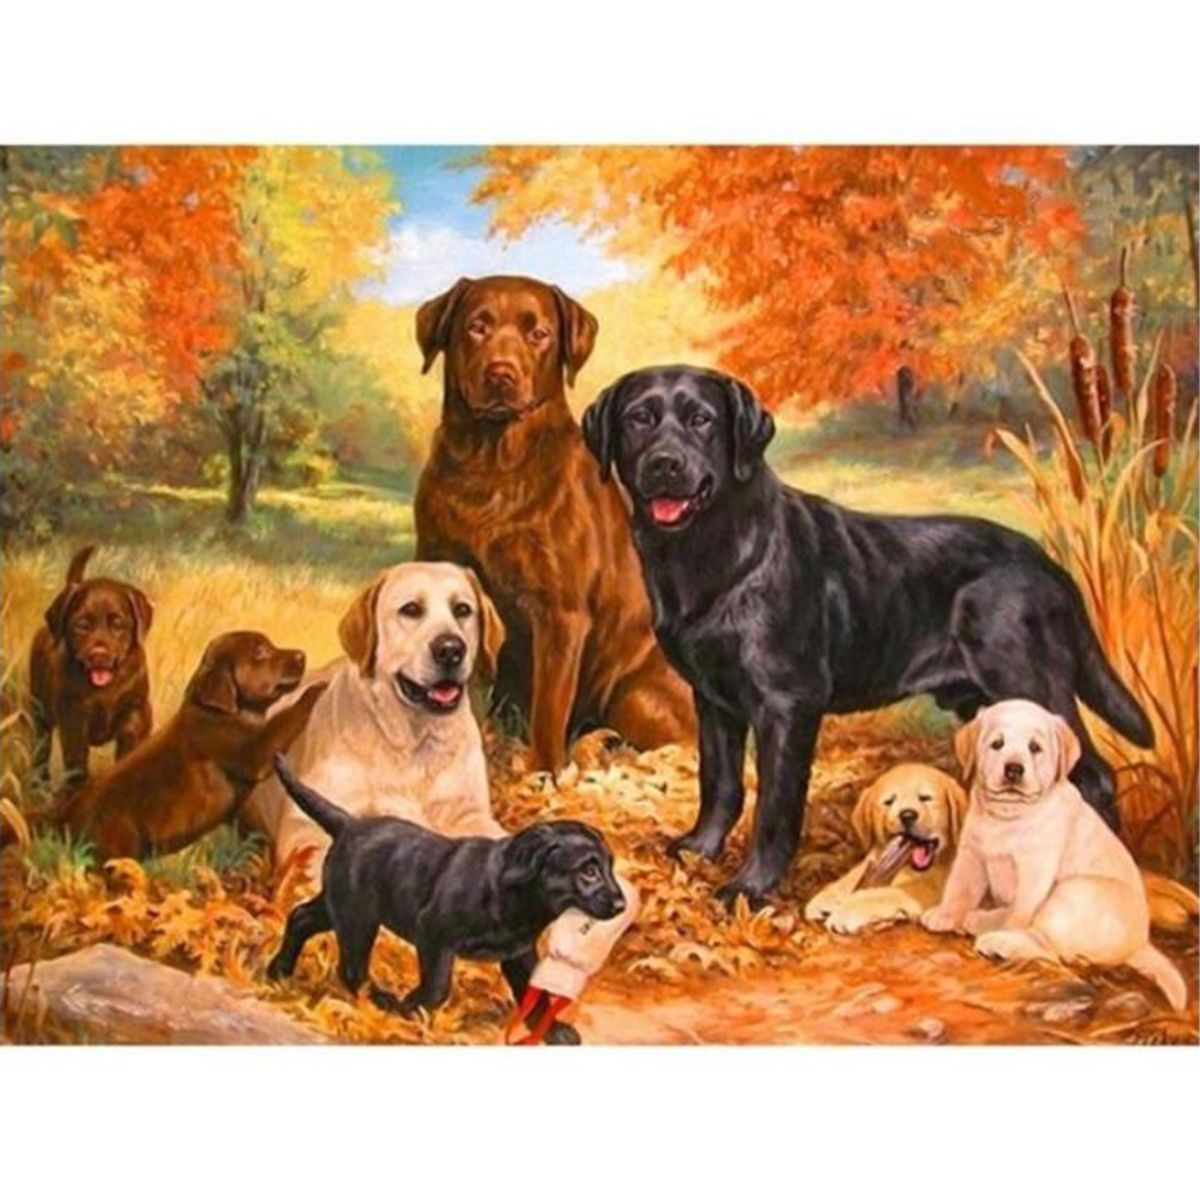 5D-Diamond-Paintings-Dogs-Embroidery-Cross-Stitch-Pictures-Arts-Craft-Tool-Kit-Decor-1633787